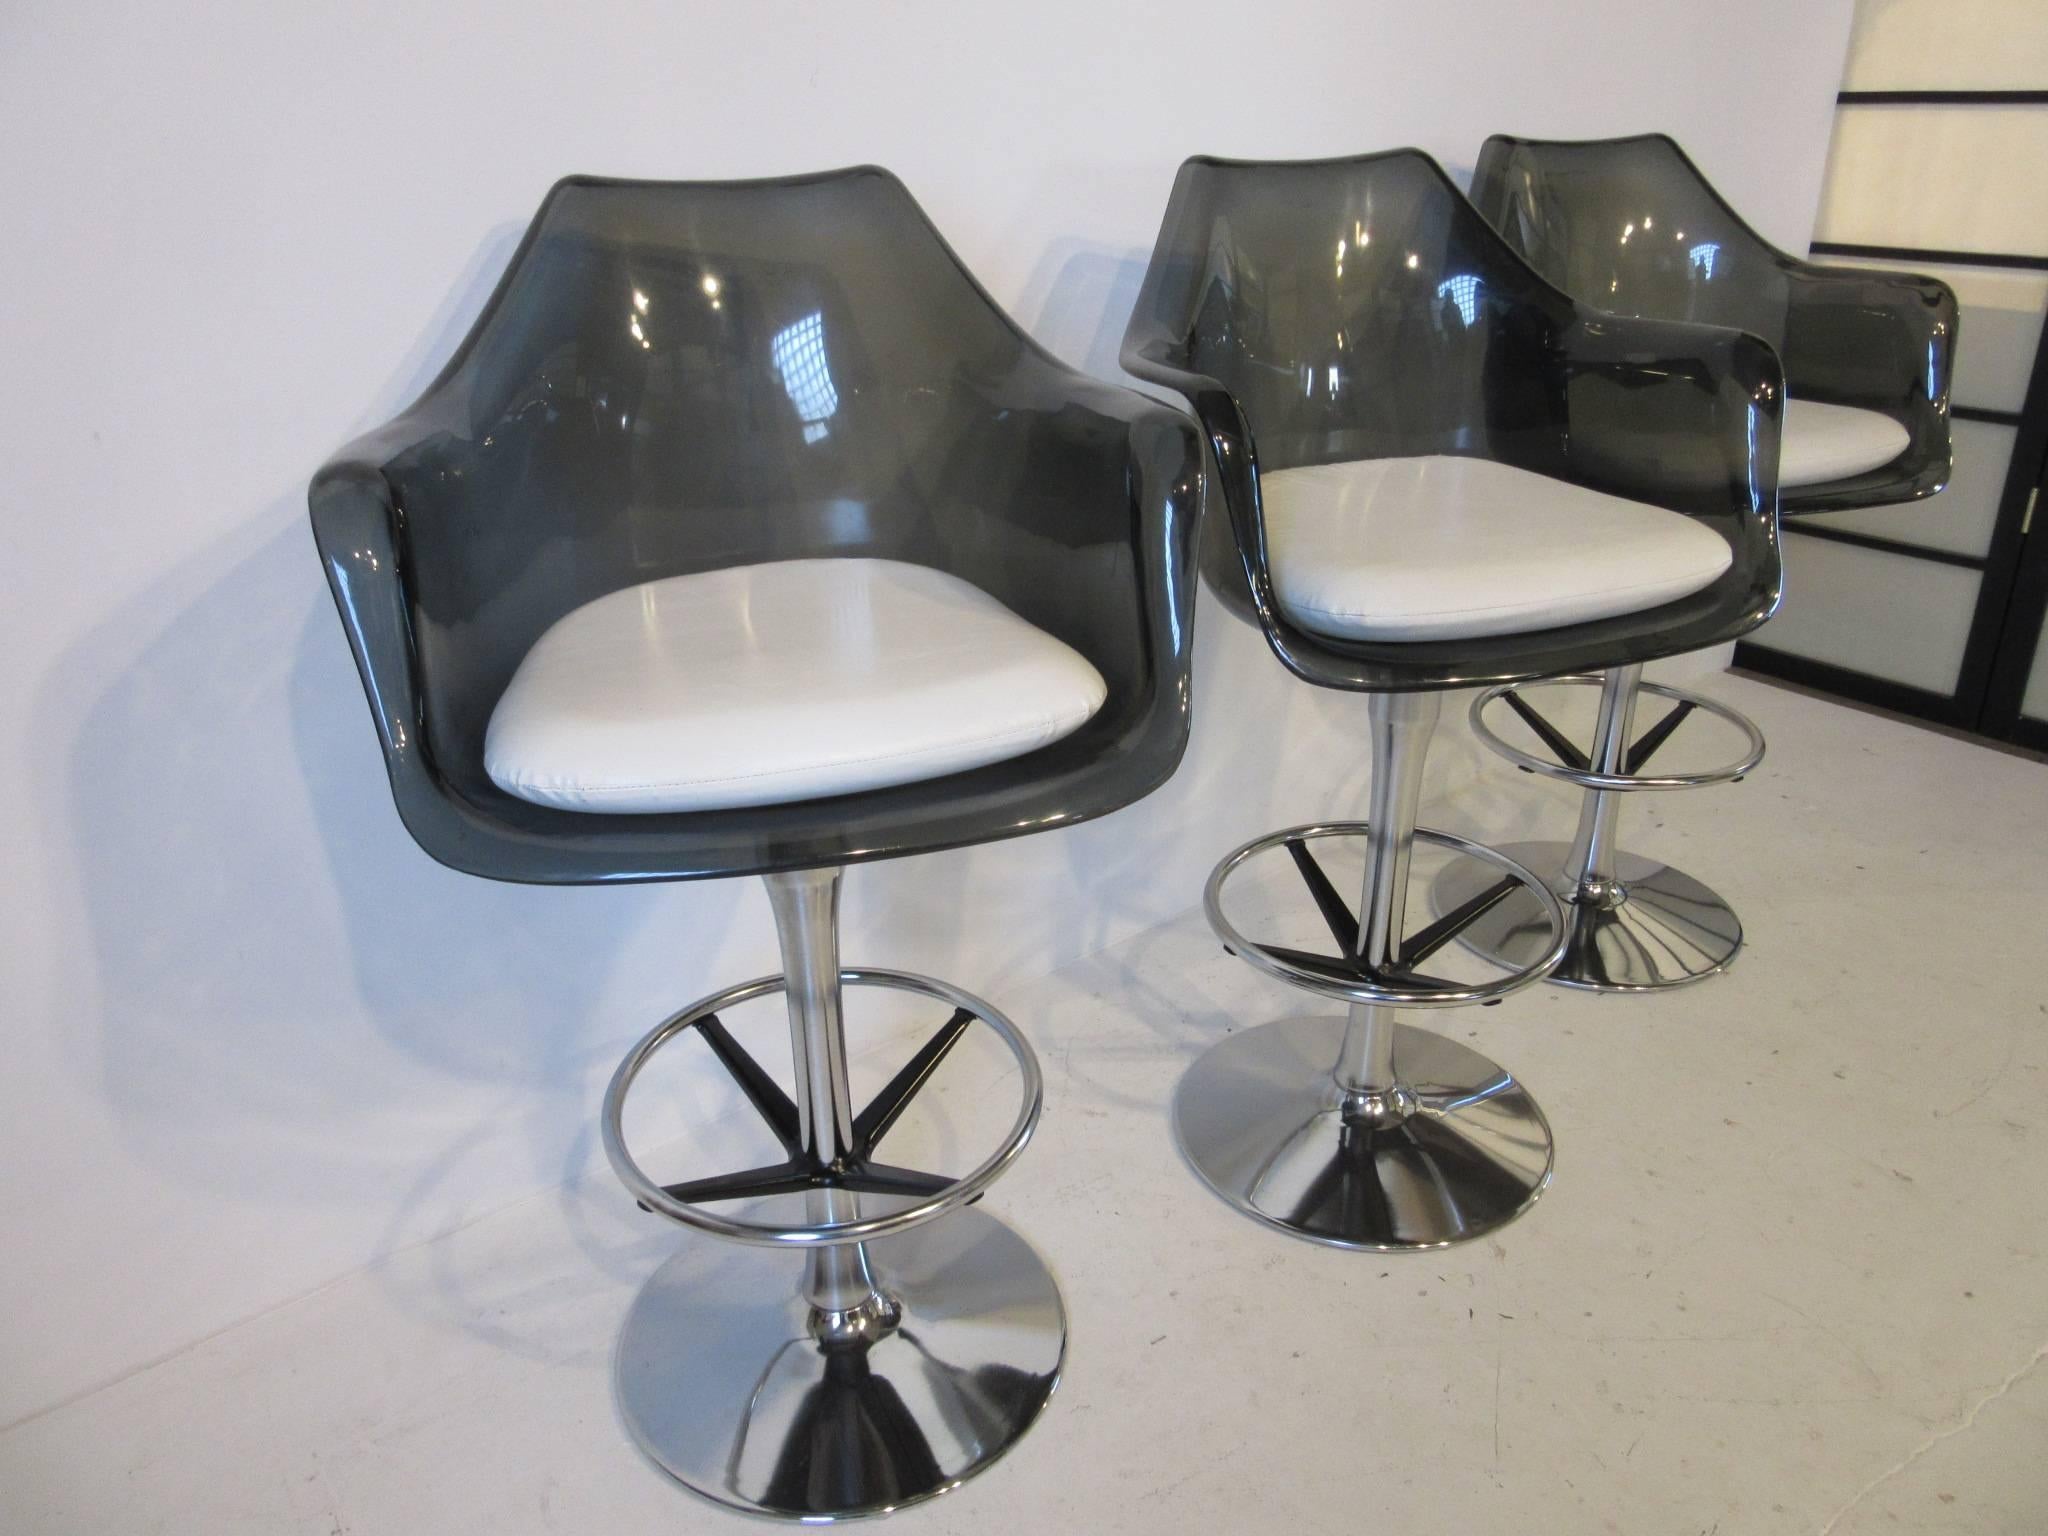 A set of three smoked Lucite bar stools with off-white leatherette upholstered cushions and chrome swiveling bases with foot rests. The seat height is 30